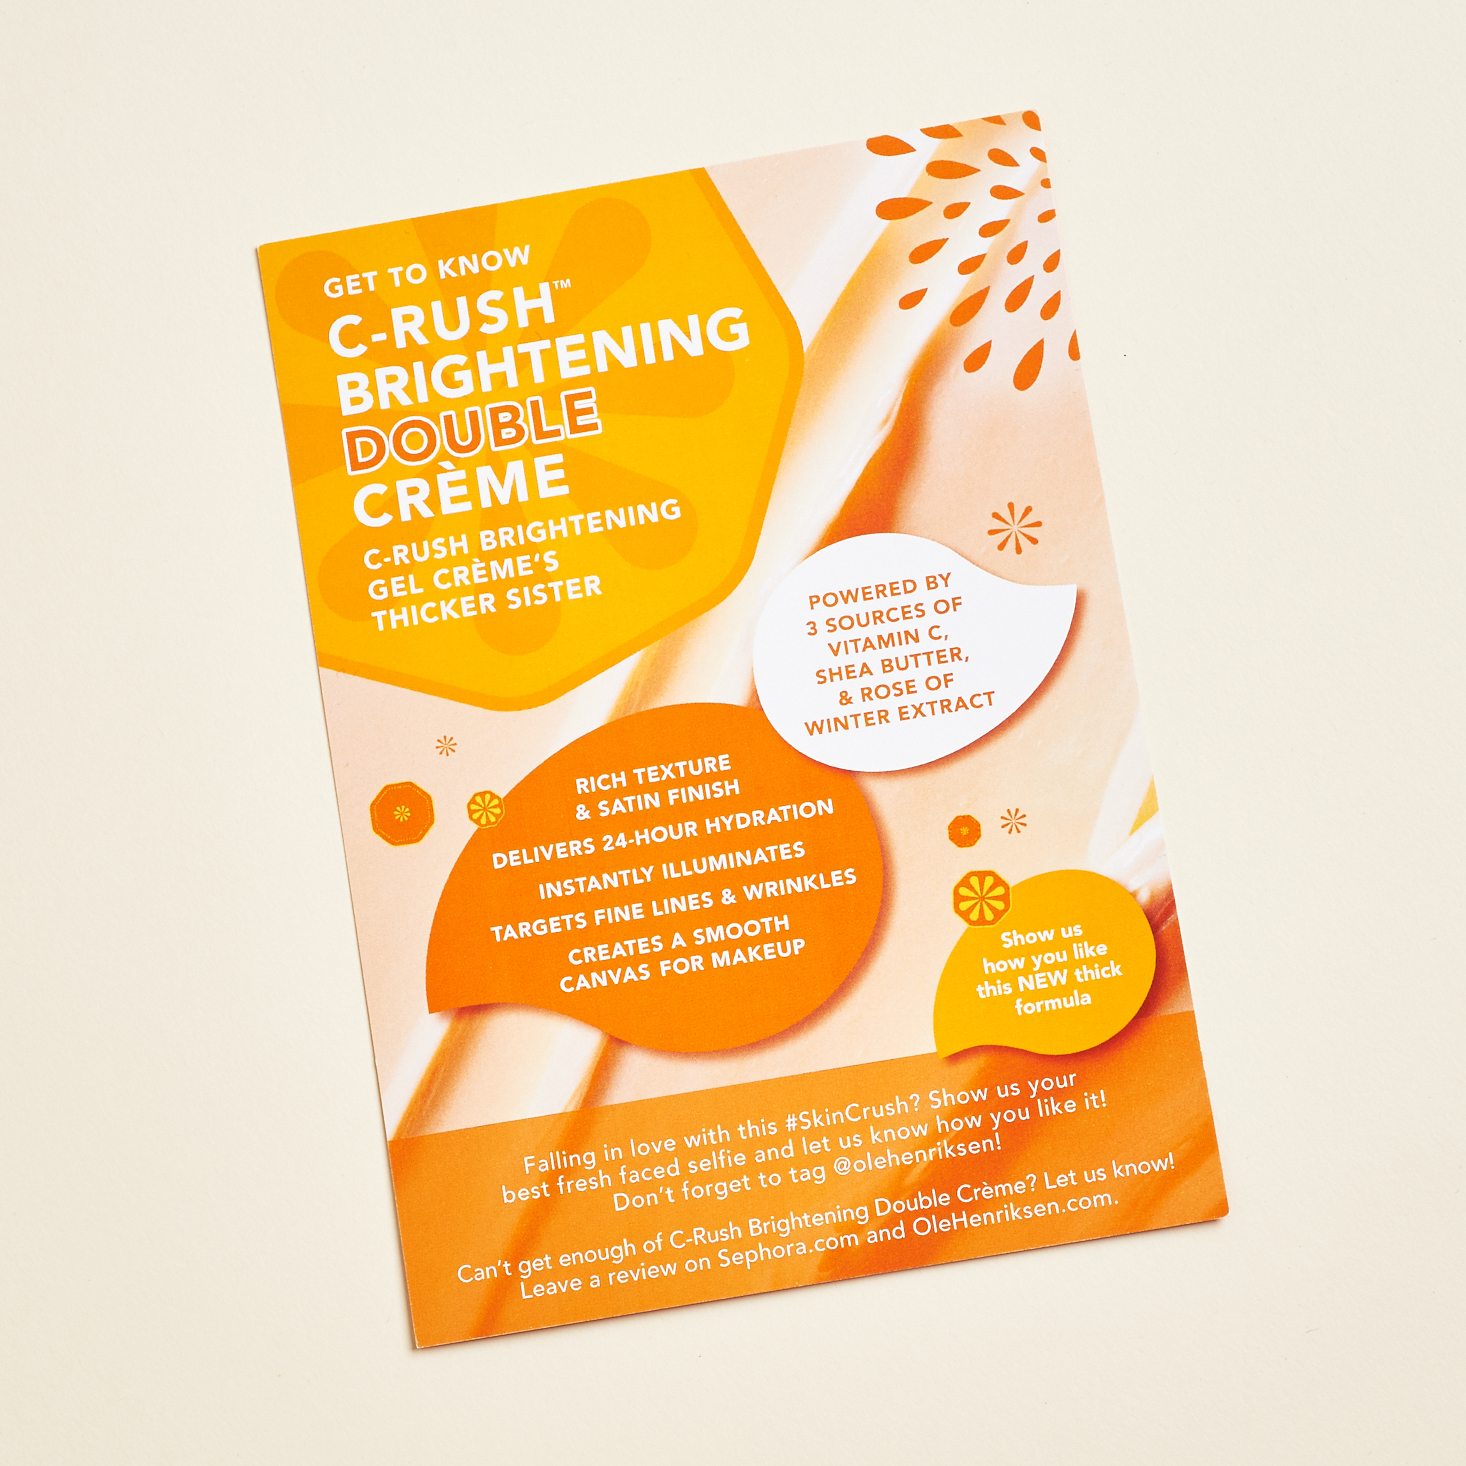 Ole Henriksen C-Rush Brightening Double Creme Ingredients and Reviews